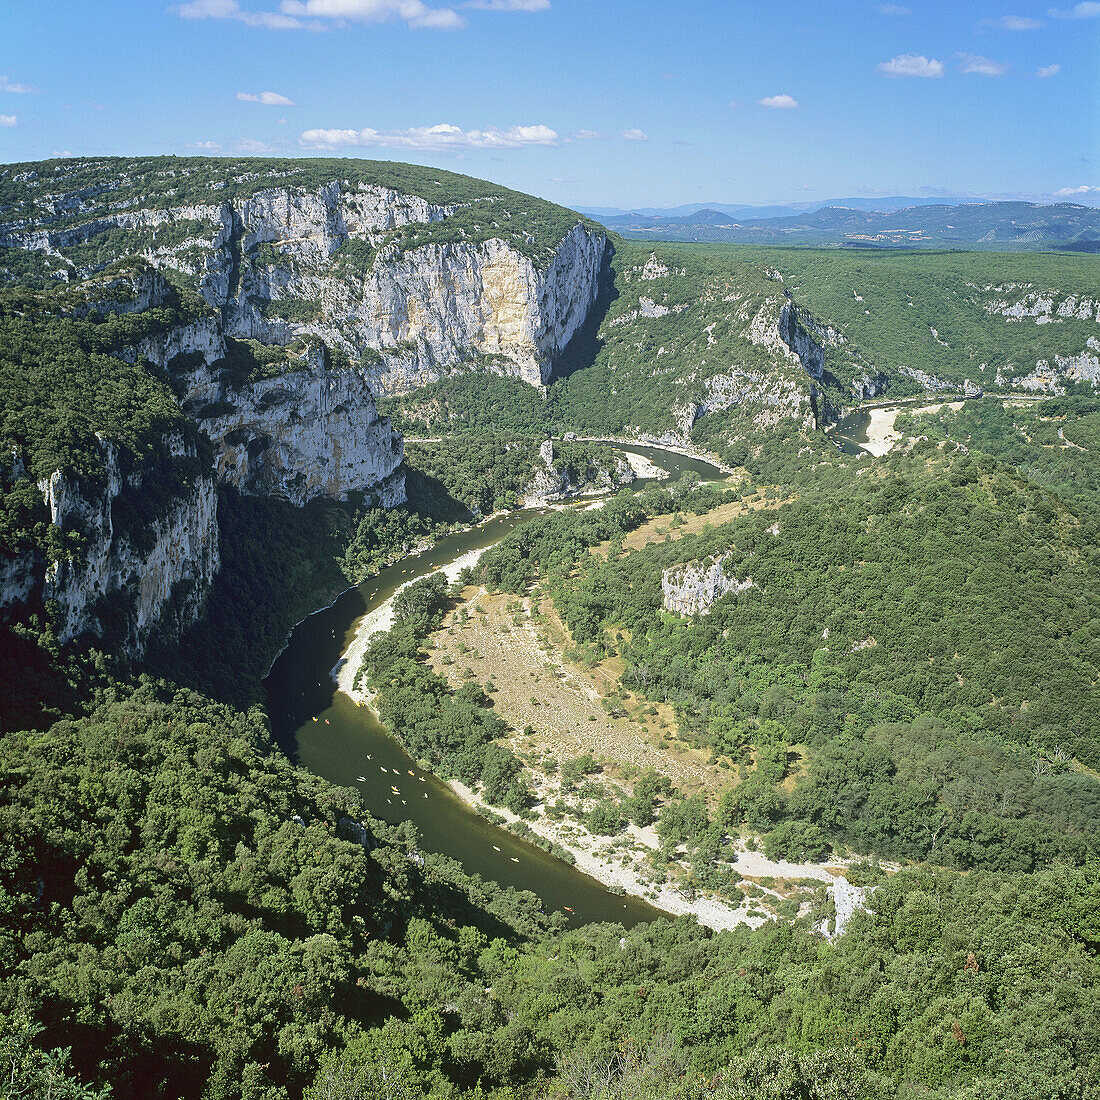 abrupt, Ardèche, attraction, blue, canoe, canyon, cliff, Color image, corniche, day, destination, discovery, ecosystem, Europe, forest, formation, France, French, geological, geology, gorge, green, Haute, landmark, Landscape, location, majestic, meander, 